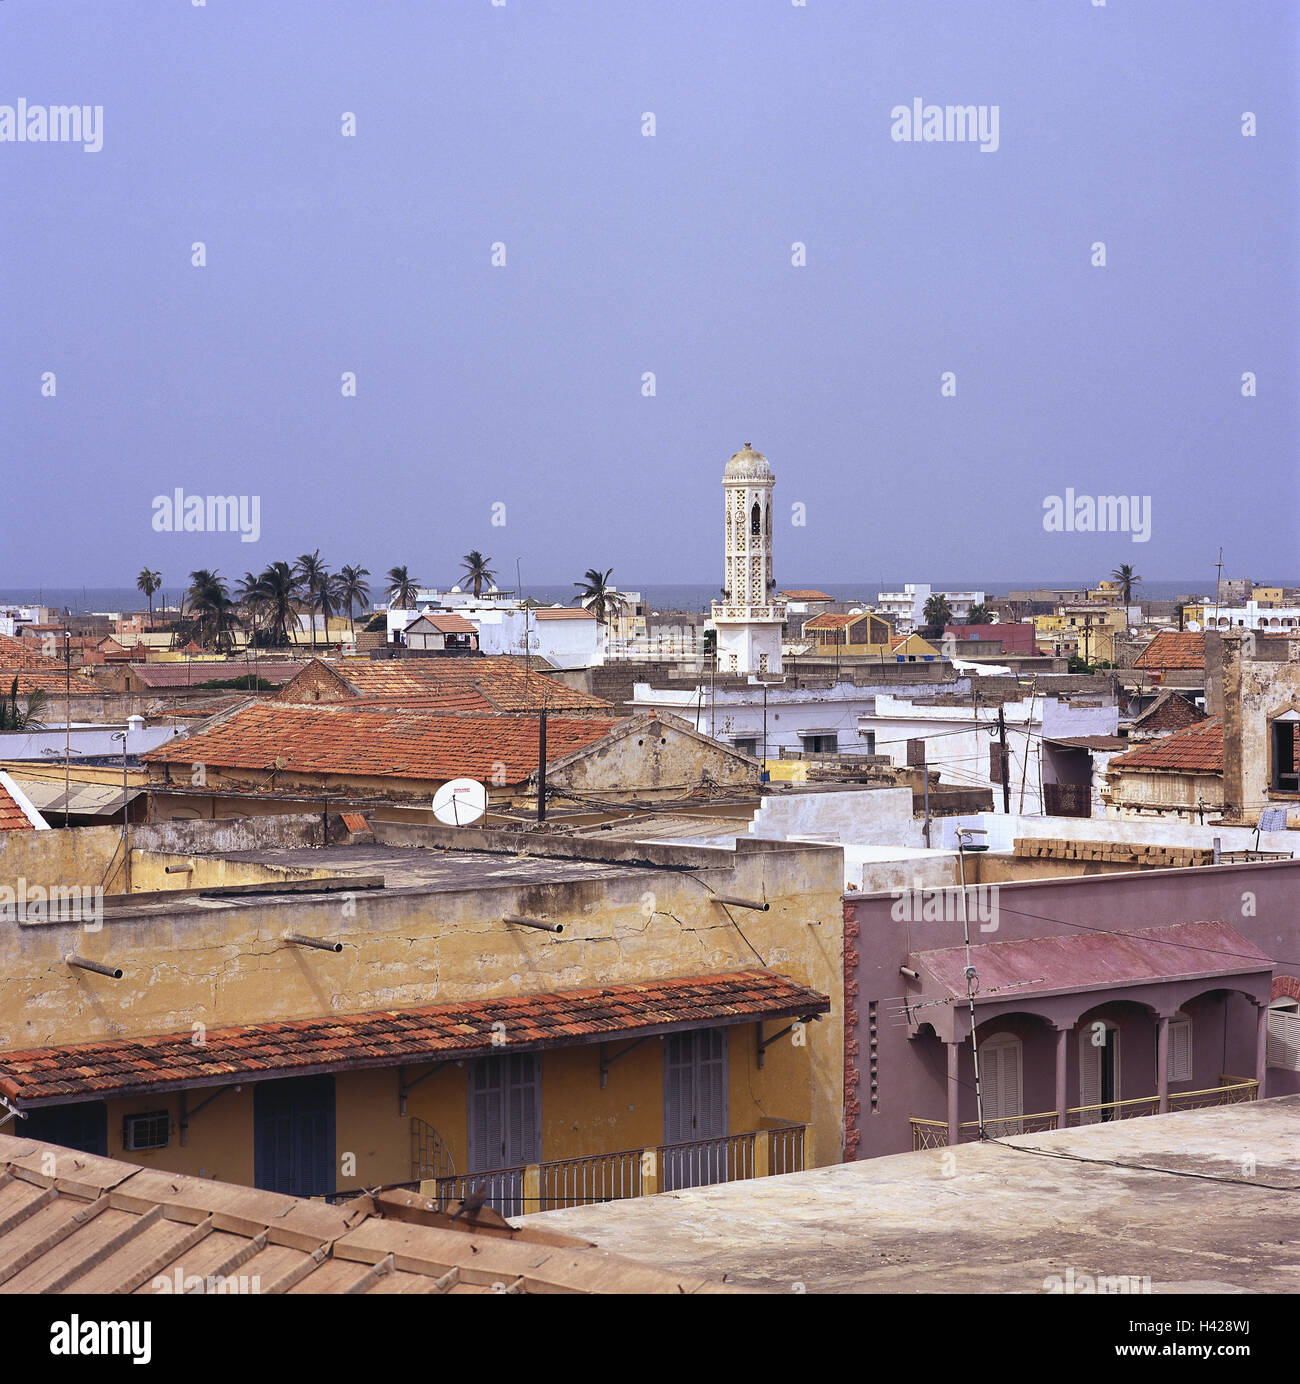 Senegal, Saint-Louis, town overview, sea, Africa, West Africa, Saint Louis, town, Ndar, houses, house roofs, weather-beaten, dilapidatedly, minaret, tower, palms, copy space, Stock Photo